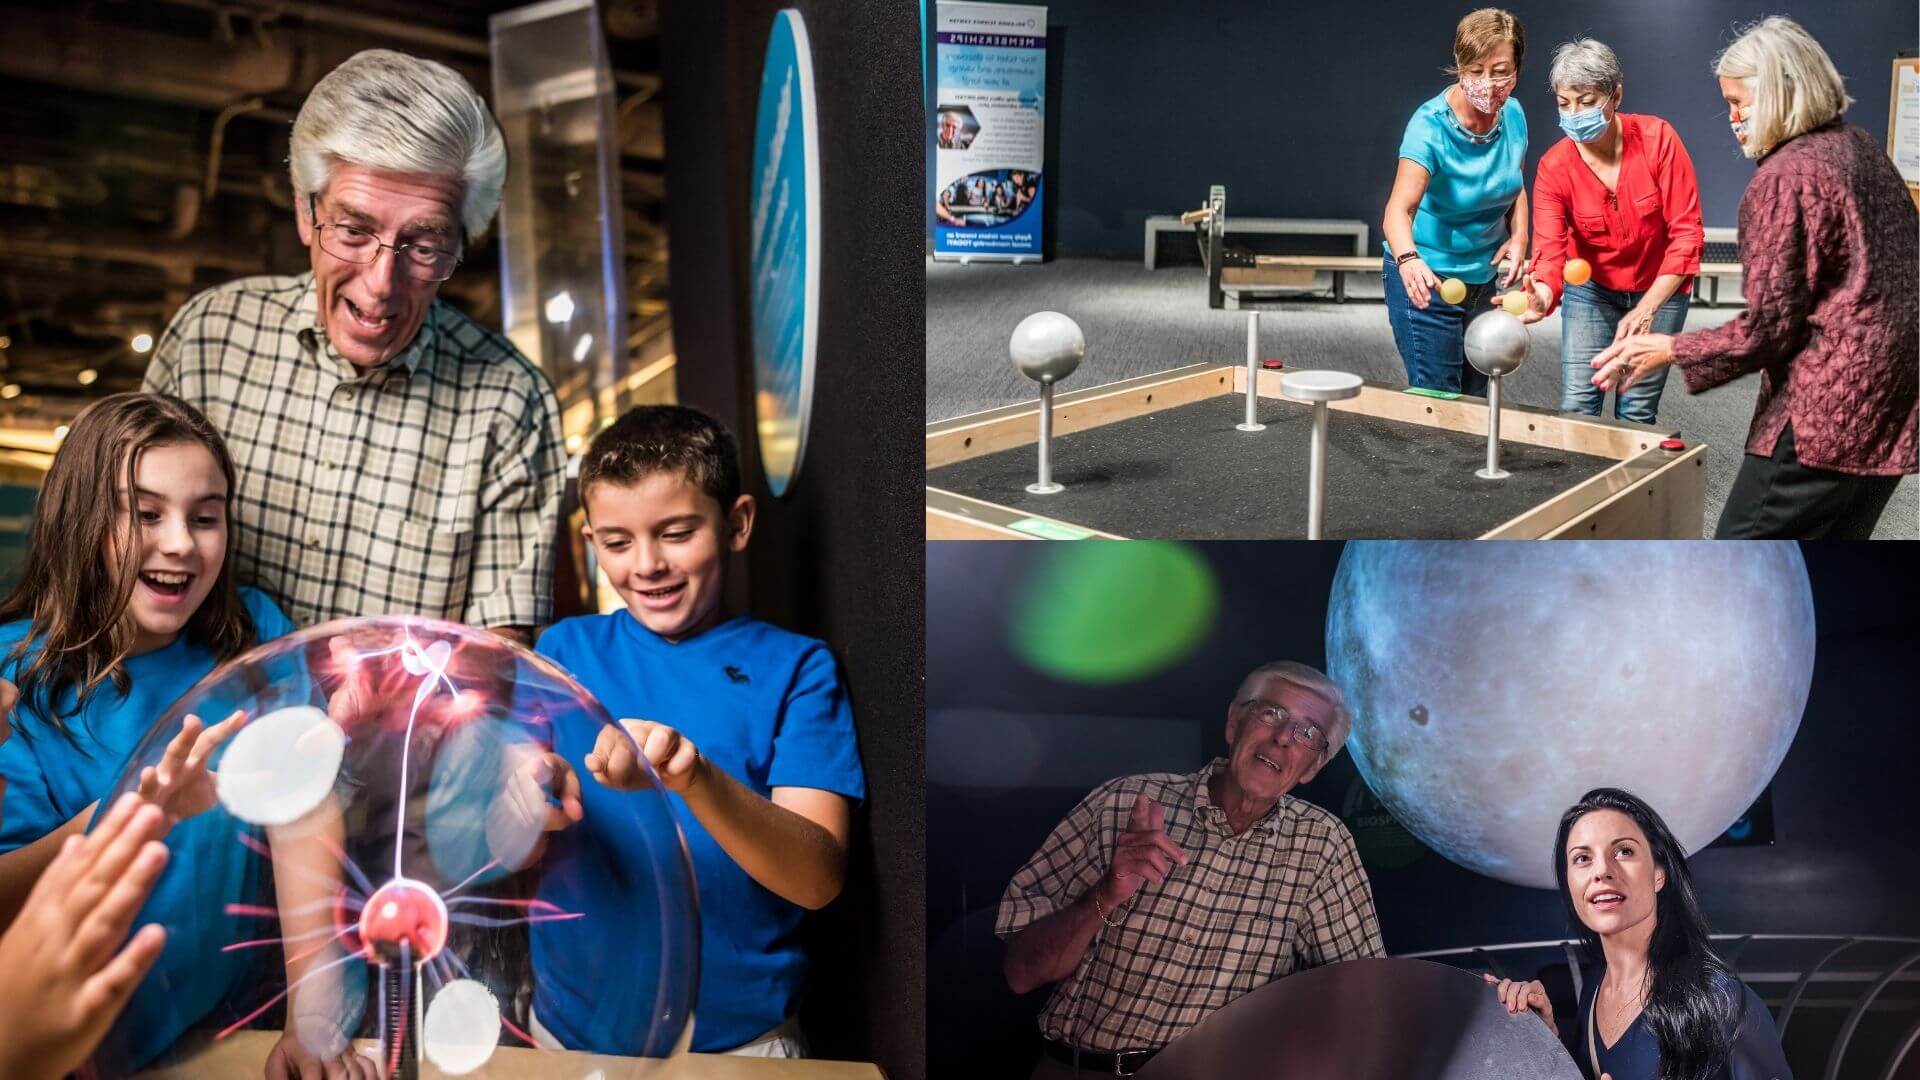 a collage of adults enjoying Orlando Science Center: A man and woman interacting with and AI screen. three women doing a physics experiment and three young adults learning about alligators